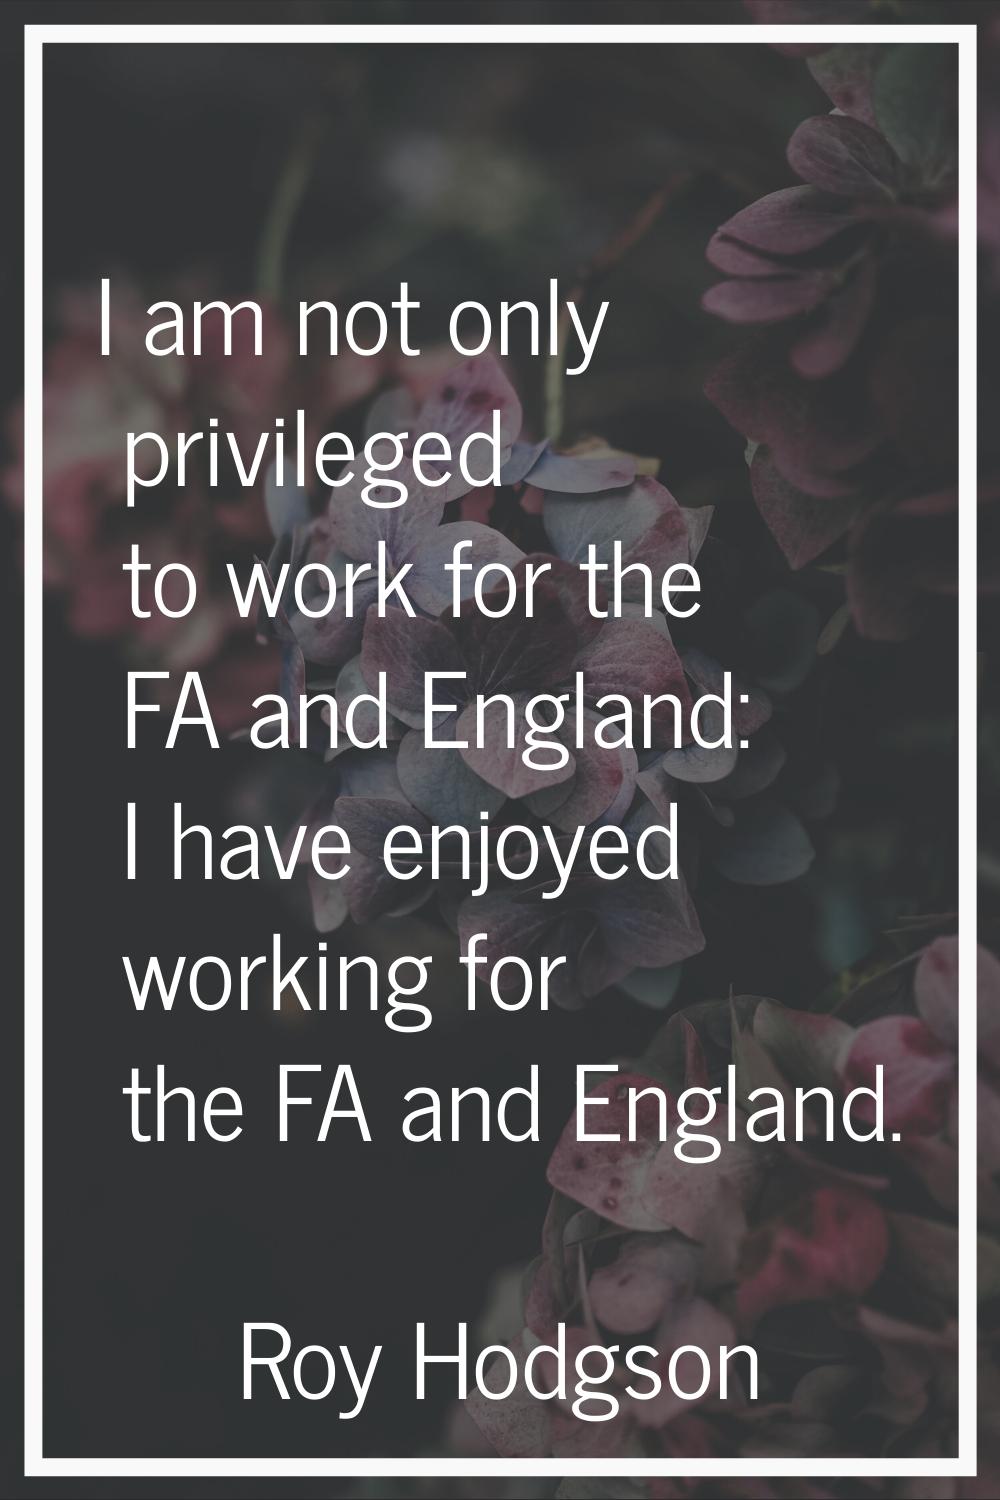 I am not only privileged to work for the FA and England: I have enjoyed working for the FA and Engl